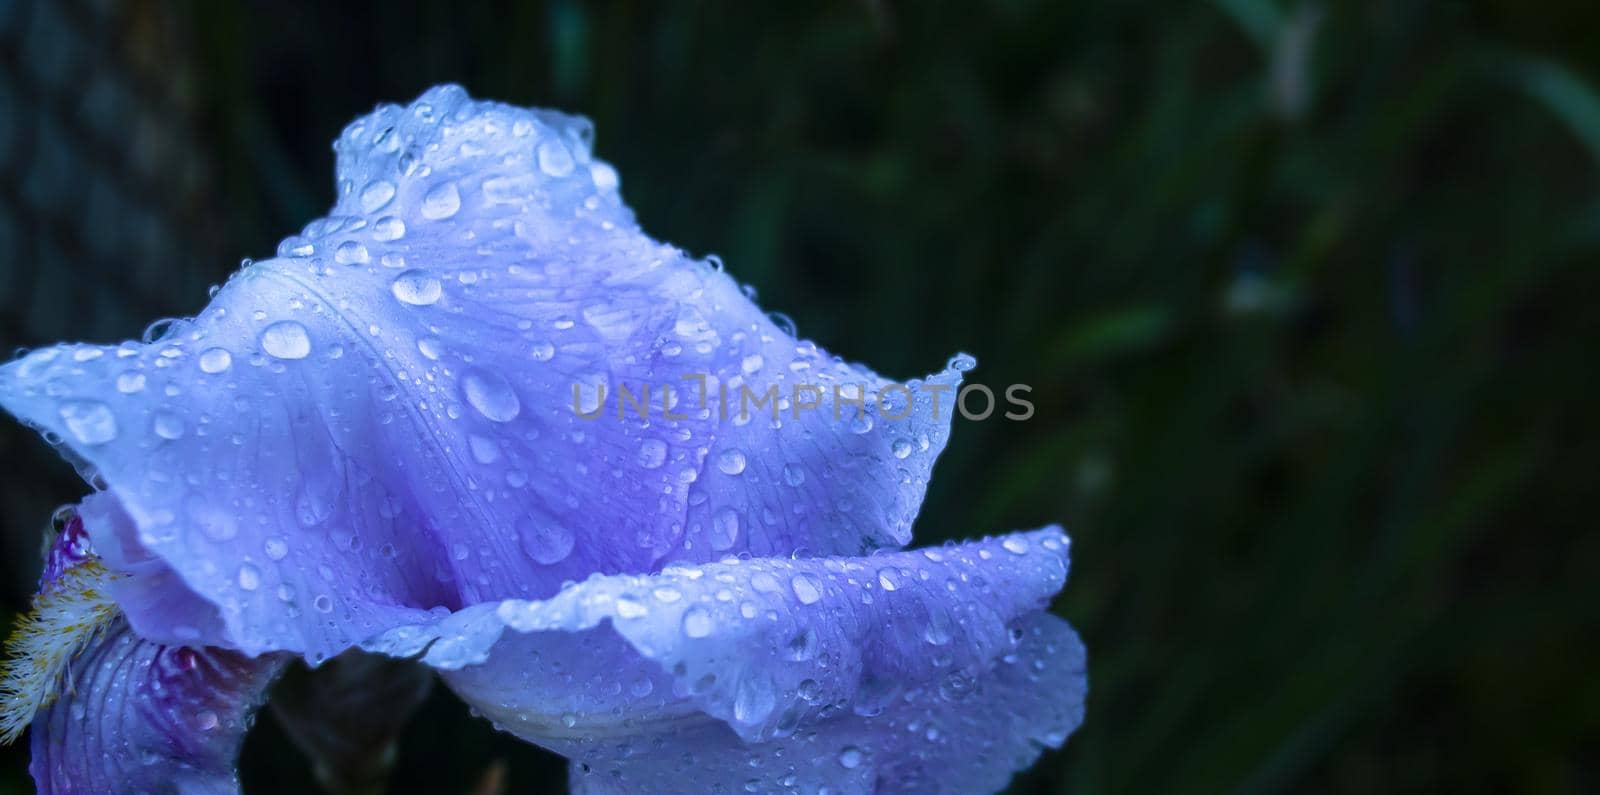 macro shot of a flower iris with water drops, Flowering irises with drops of water after rain, background, blue, nature, garden, green, plant, bloom, spring, white, purple, blooming, summer, flora, japanese, blossom, flowers, violet, color, beautiful, floral, petal botany beauty macro natural day colorful field fresh bright